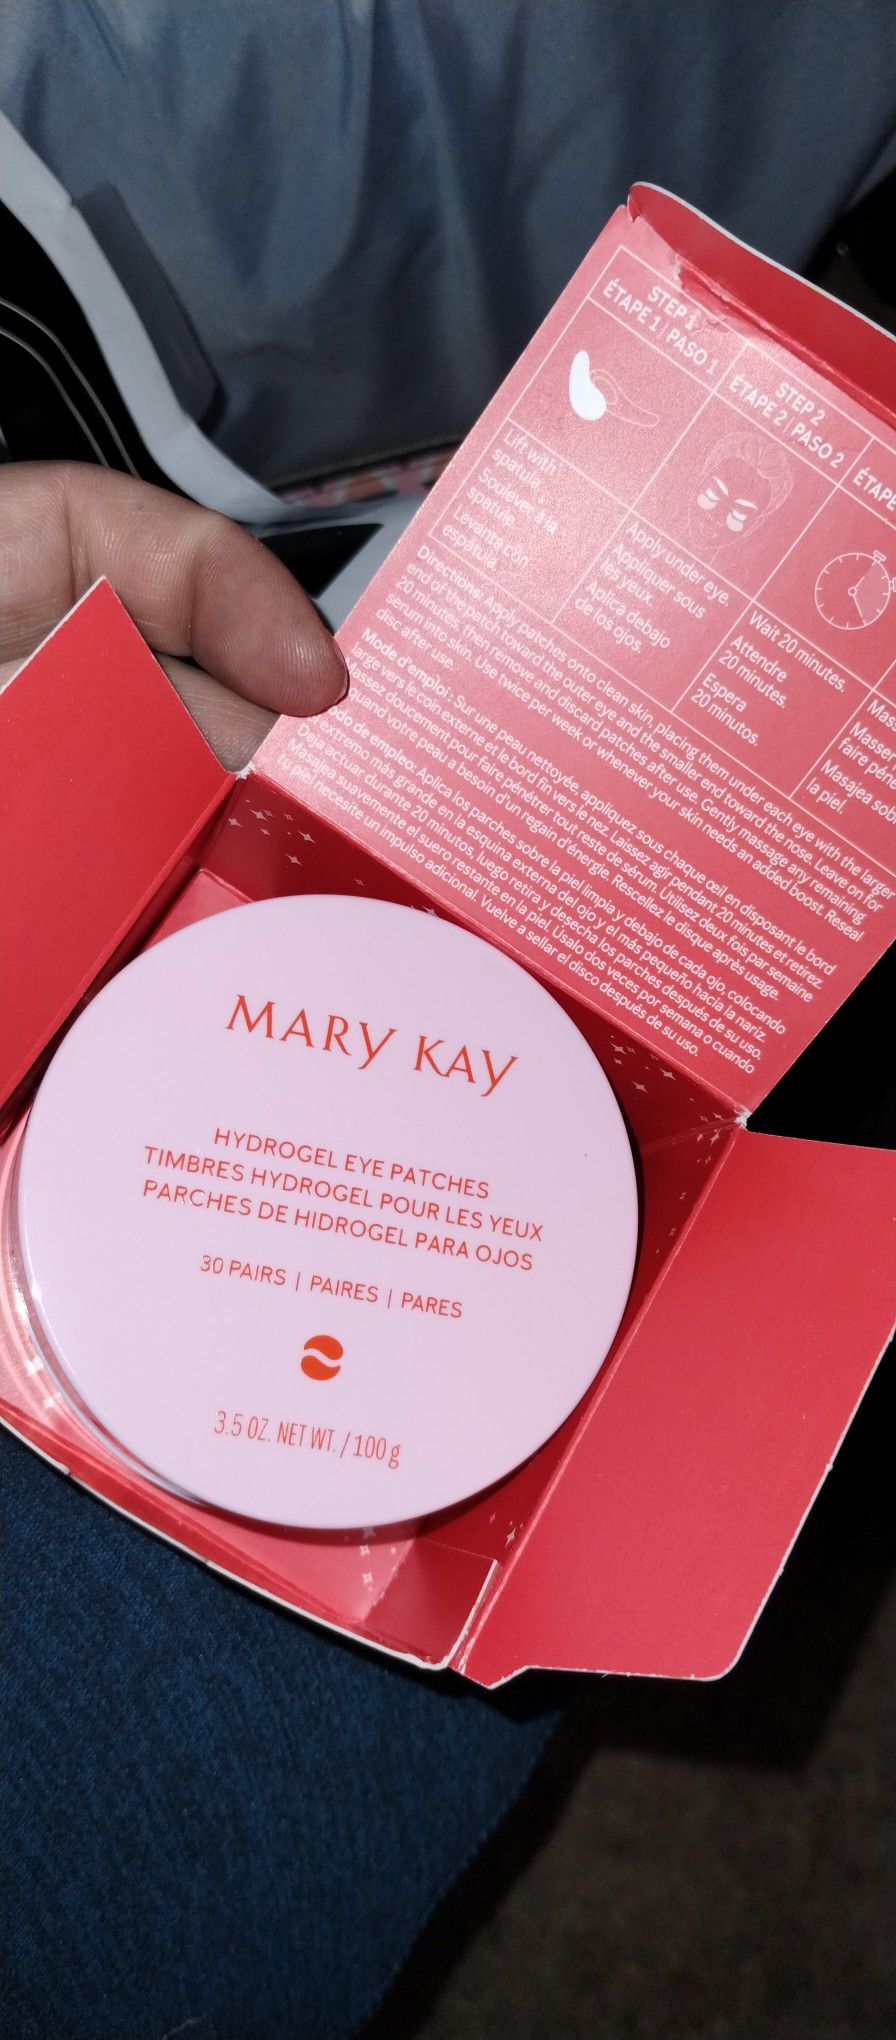 NEW Mary Kay Hydrogen Eye Patches 